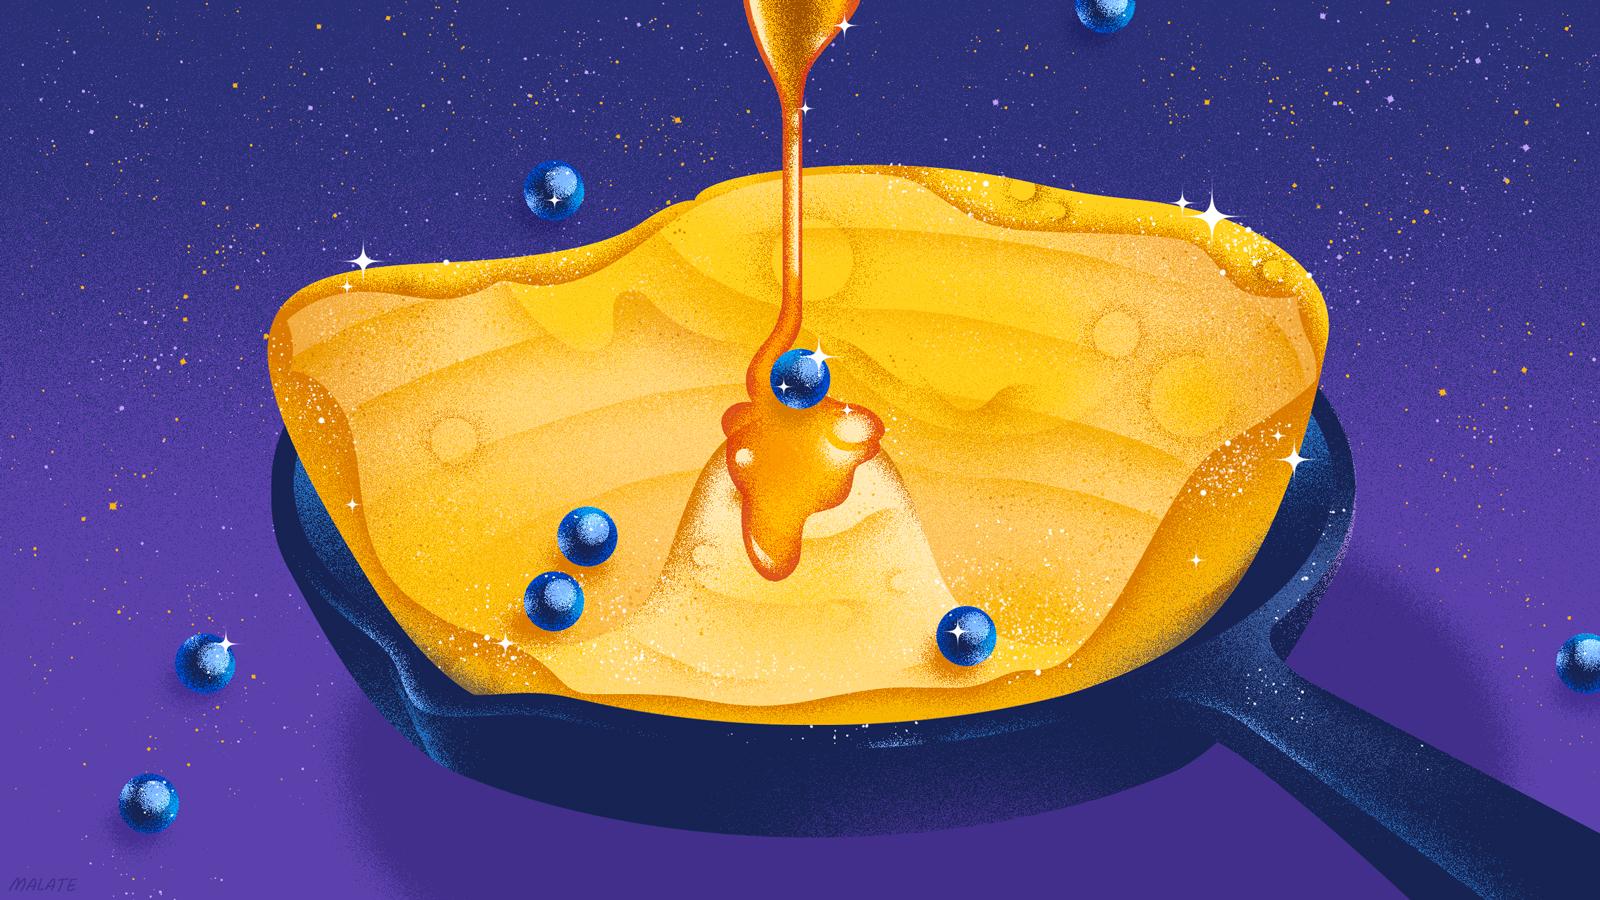 Illustration of a Dutch baby pancake with blueberries, surrounded by stars